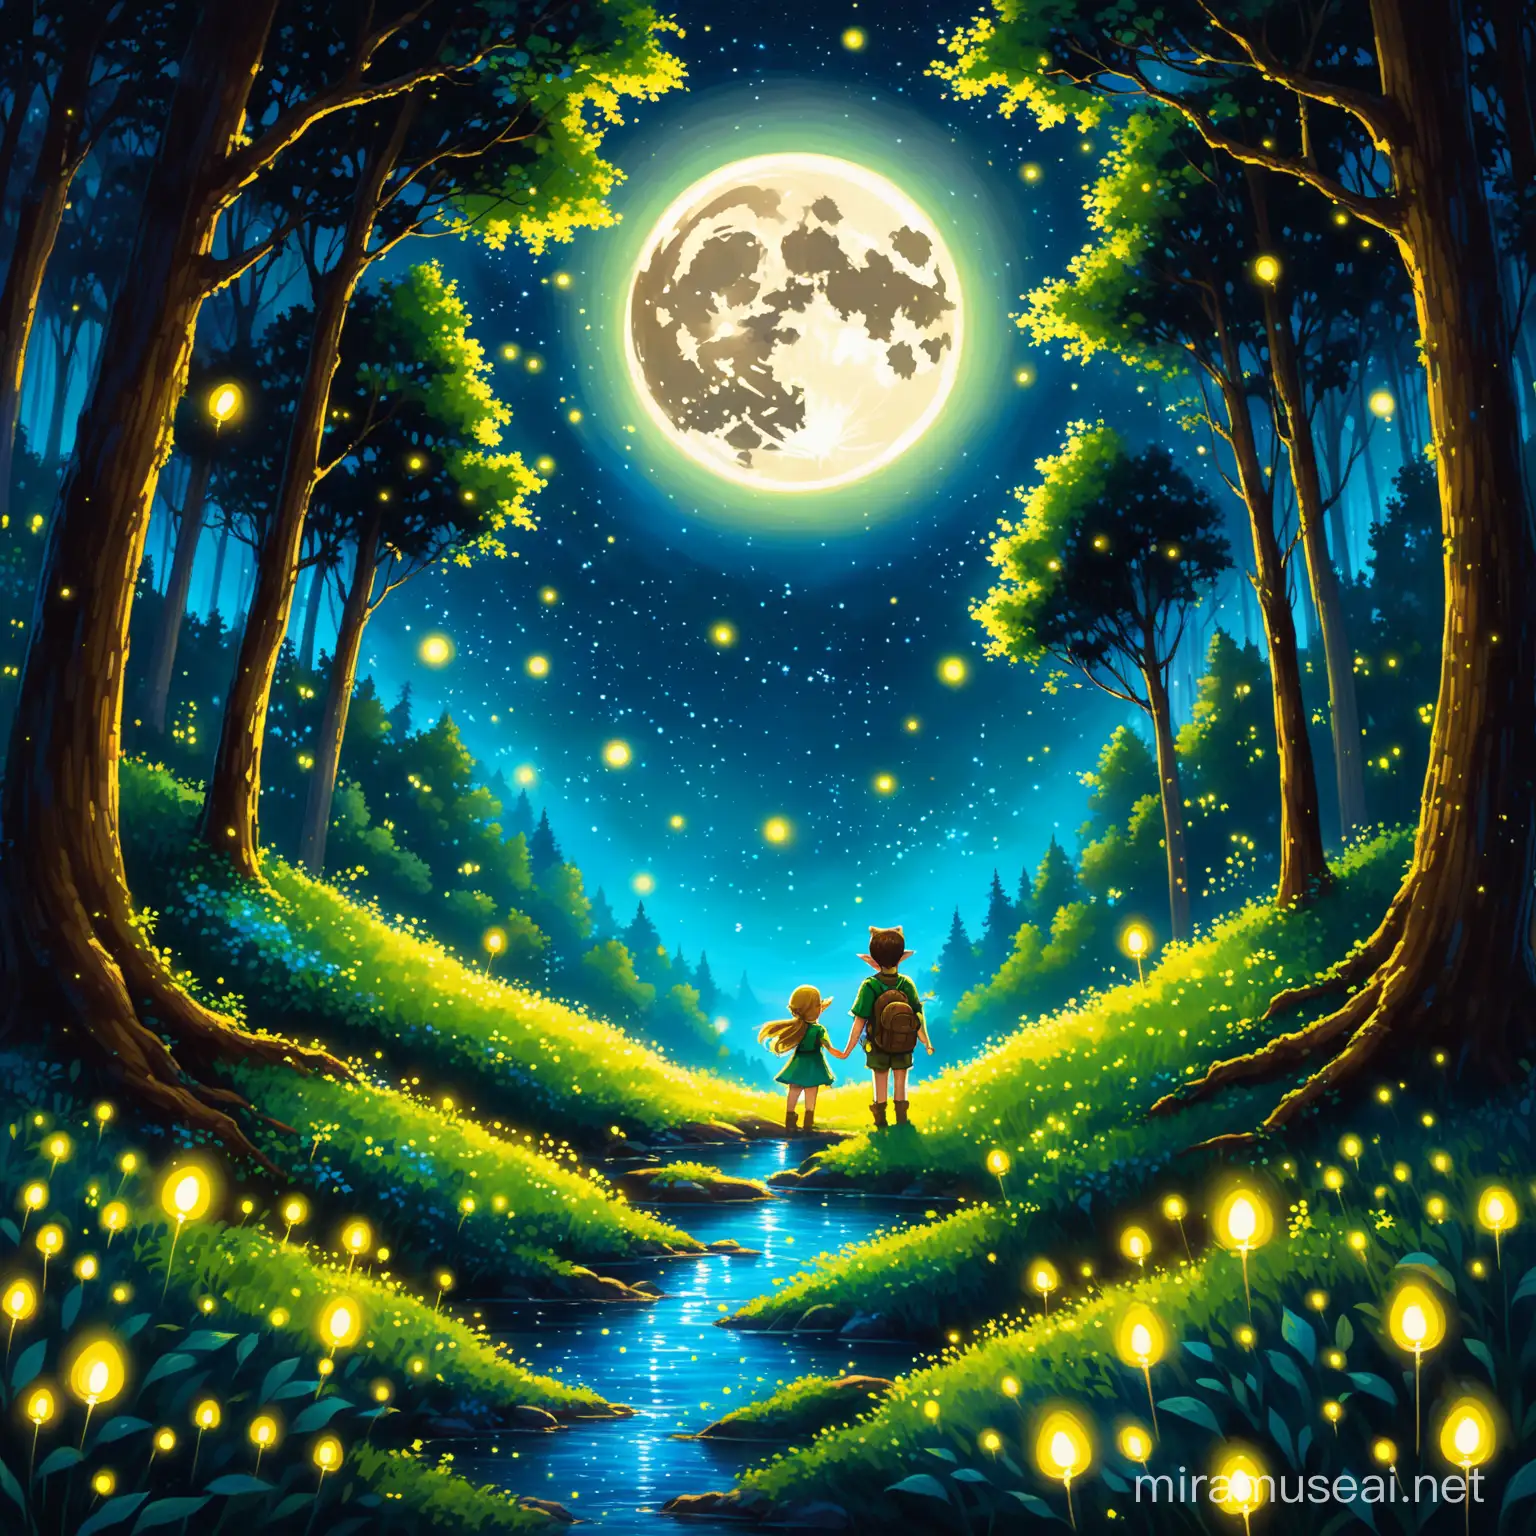 In the original forest, there are dense low bushes, glowing fireflies, and the forest is full of elves, There are stars and a bright moon in the night sky, There is a little girl in the forest, accompanied by a cat and a boy, adventuring together, This is a painting with broad strokes, similar to 'Breath of the Wild', with a perspective view of space, belonging to the genre of magical realism, with a hand-drawn style and very delicate technique,